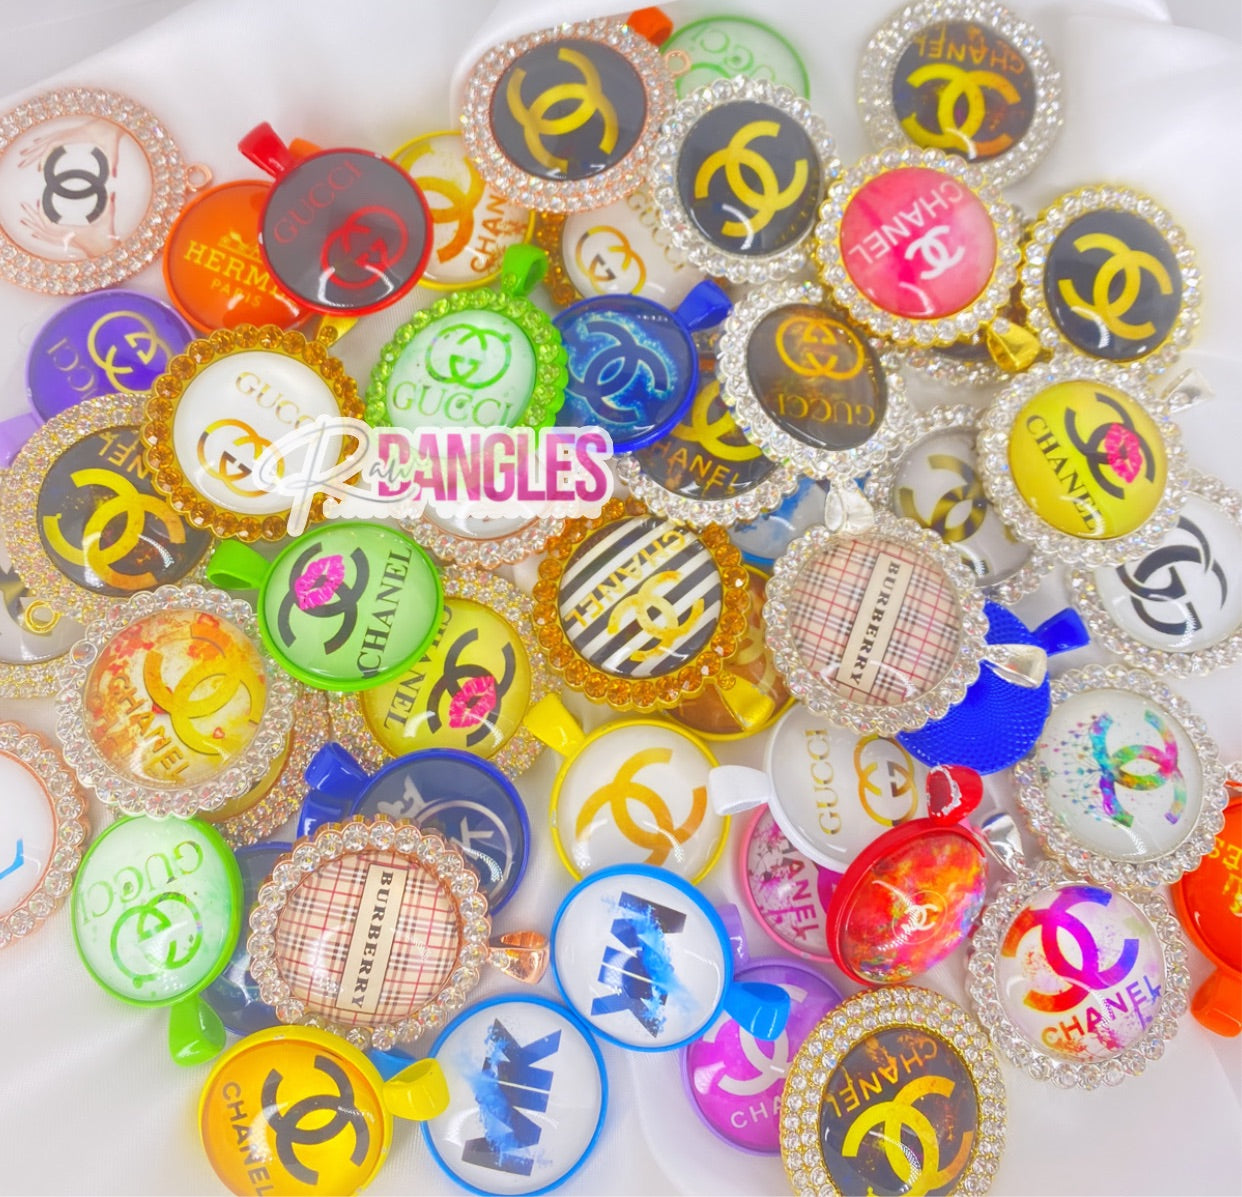 Liquidation Bulk Charms Lot, Pendant Charm Mix, Assorted Charms or Request  Some Themes 